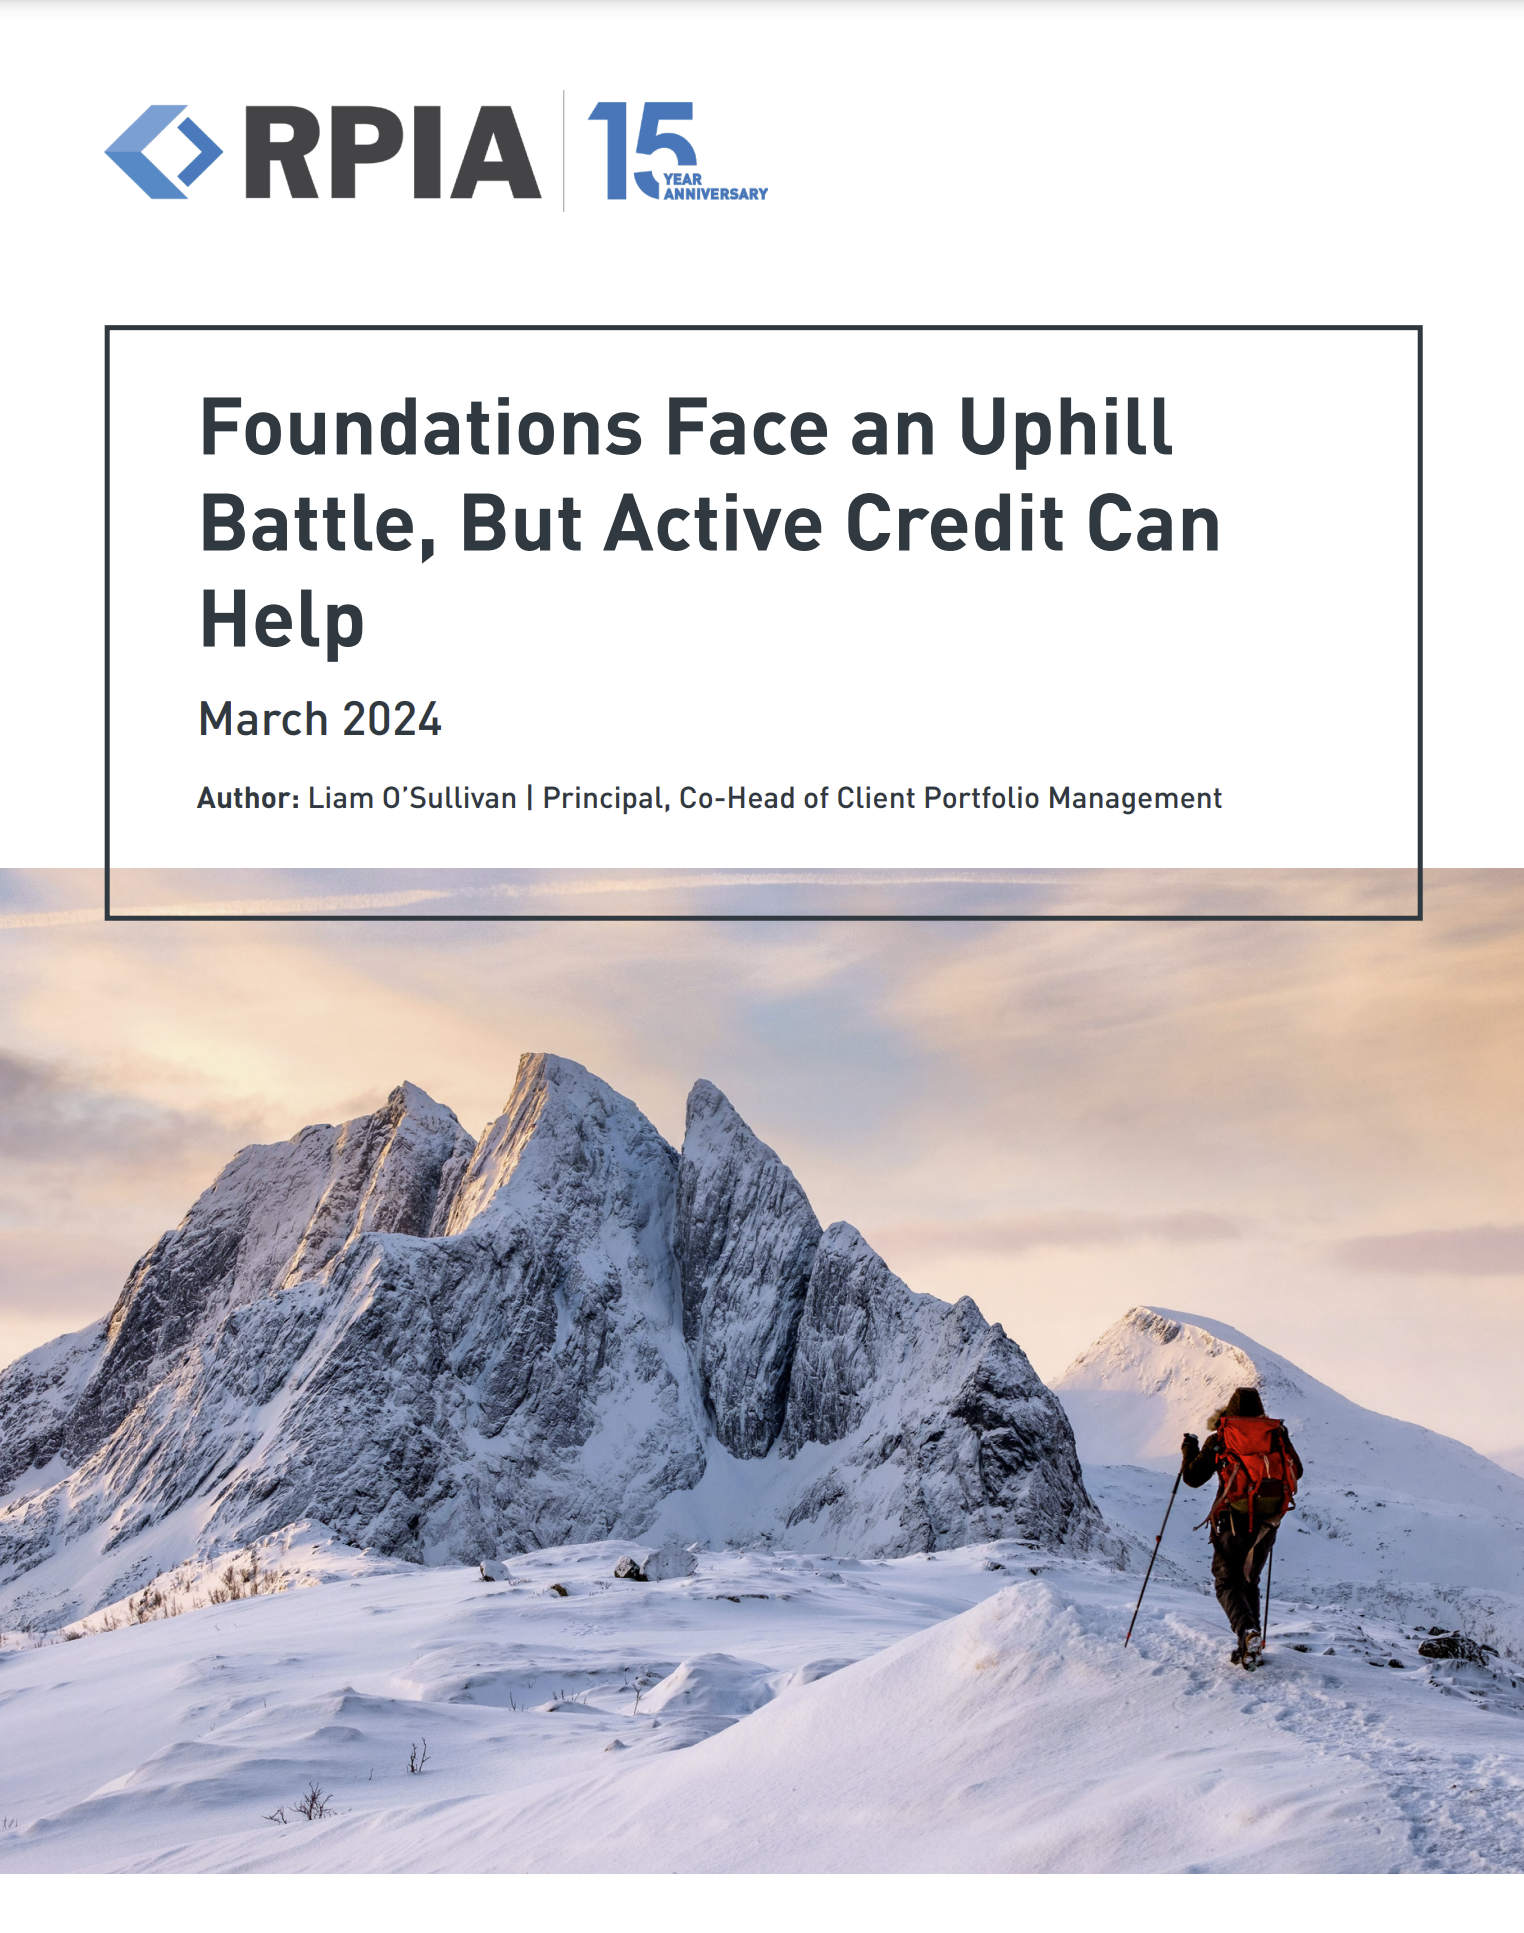 foundations-face-an-uphill-battle-but-active-credit-can-help